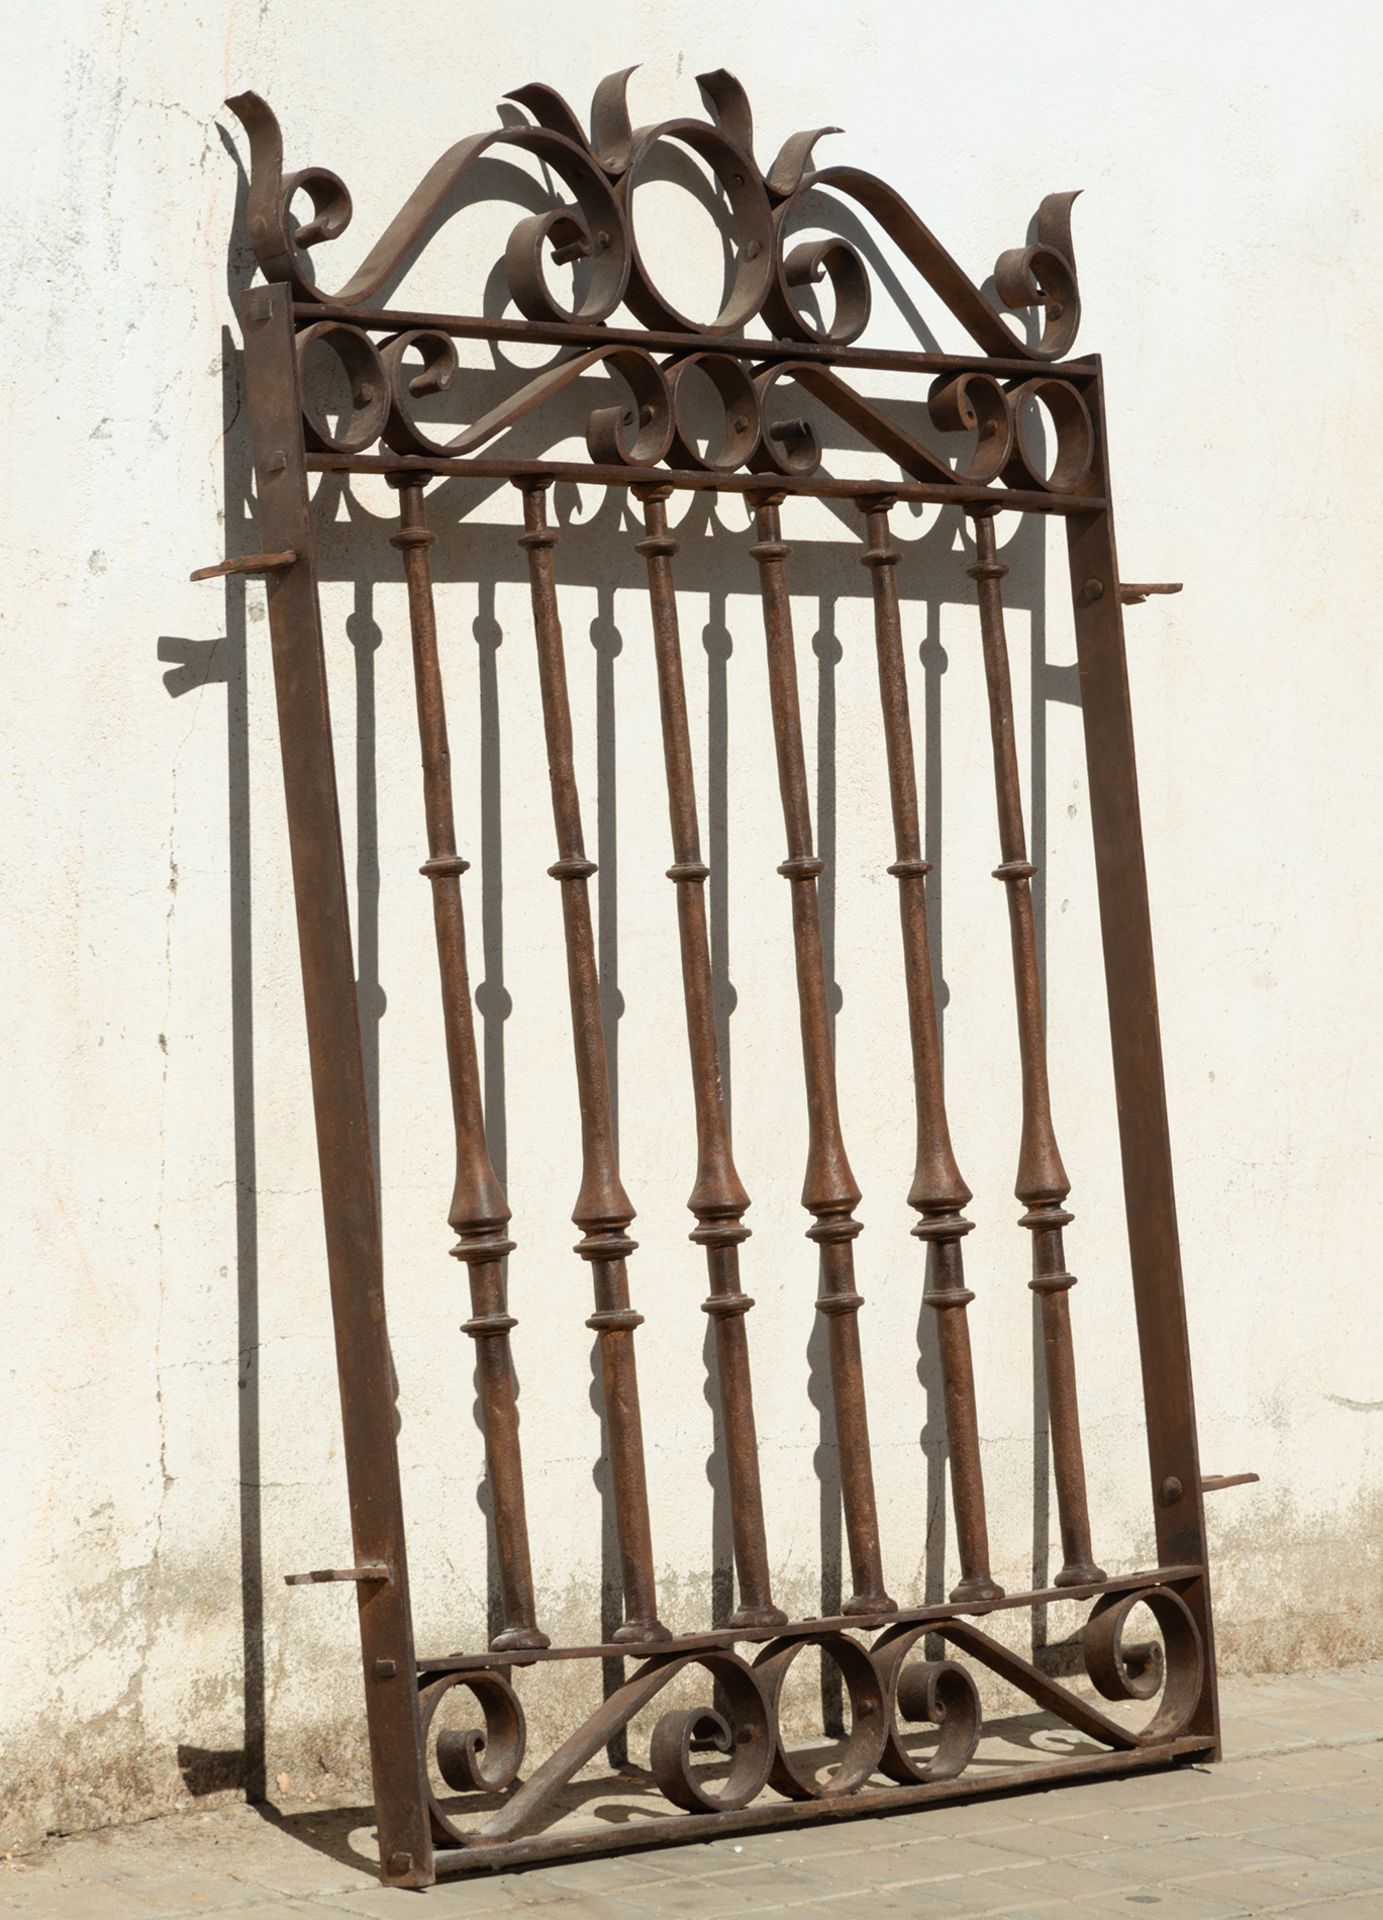 Wrought iron grill for window, 19th century - Image 3 of 4